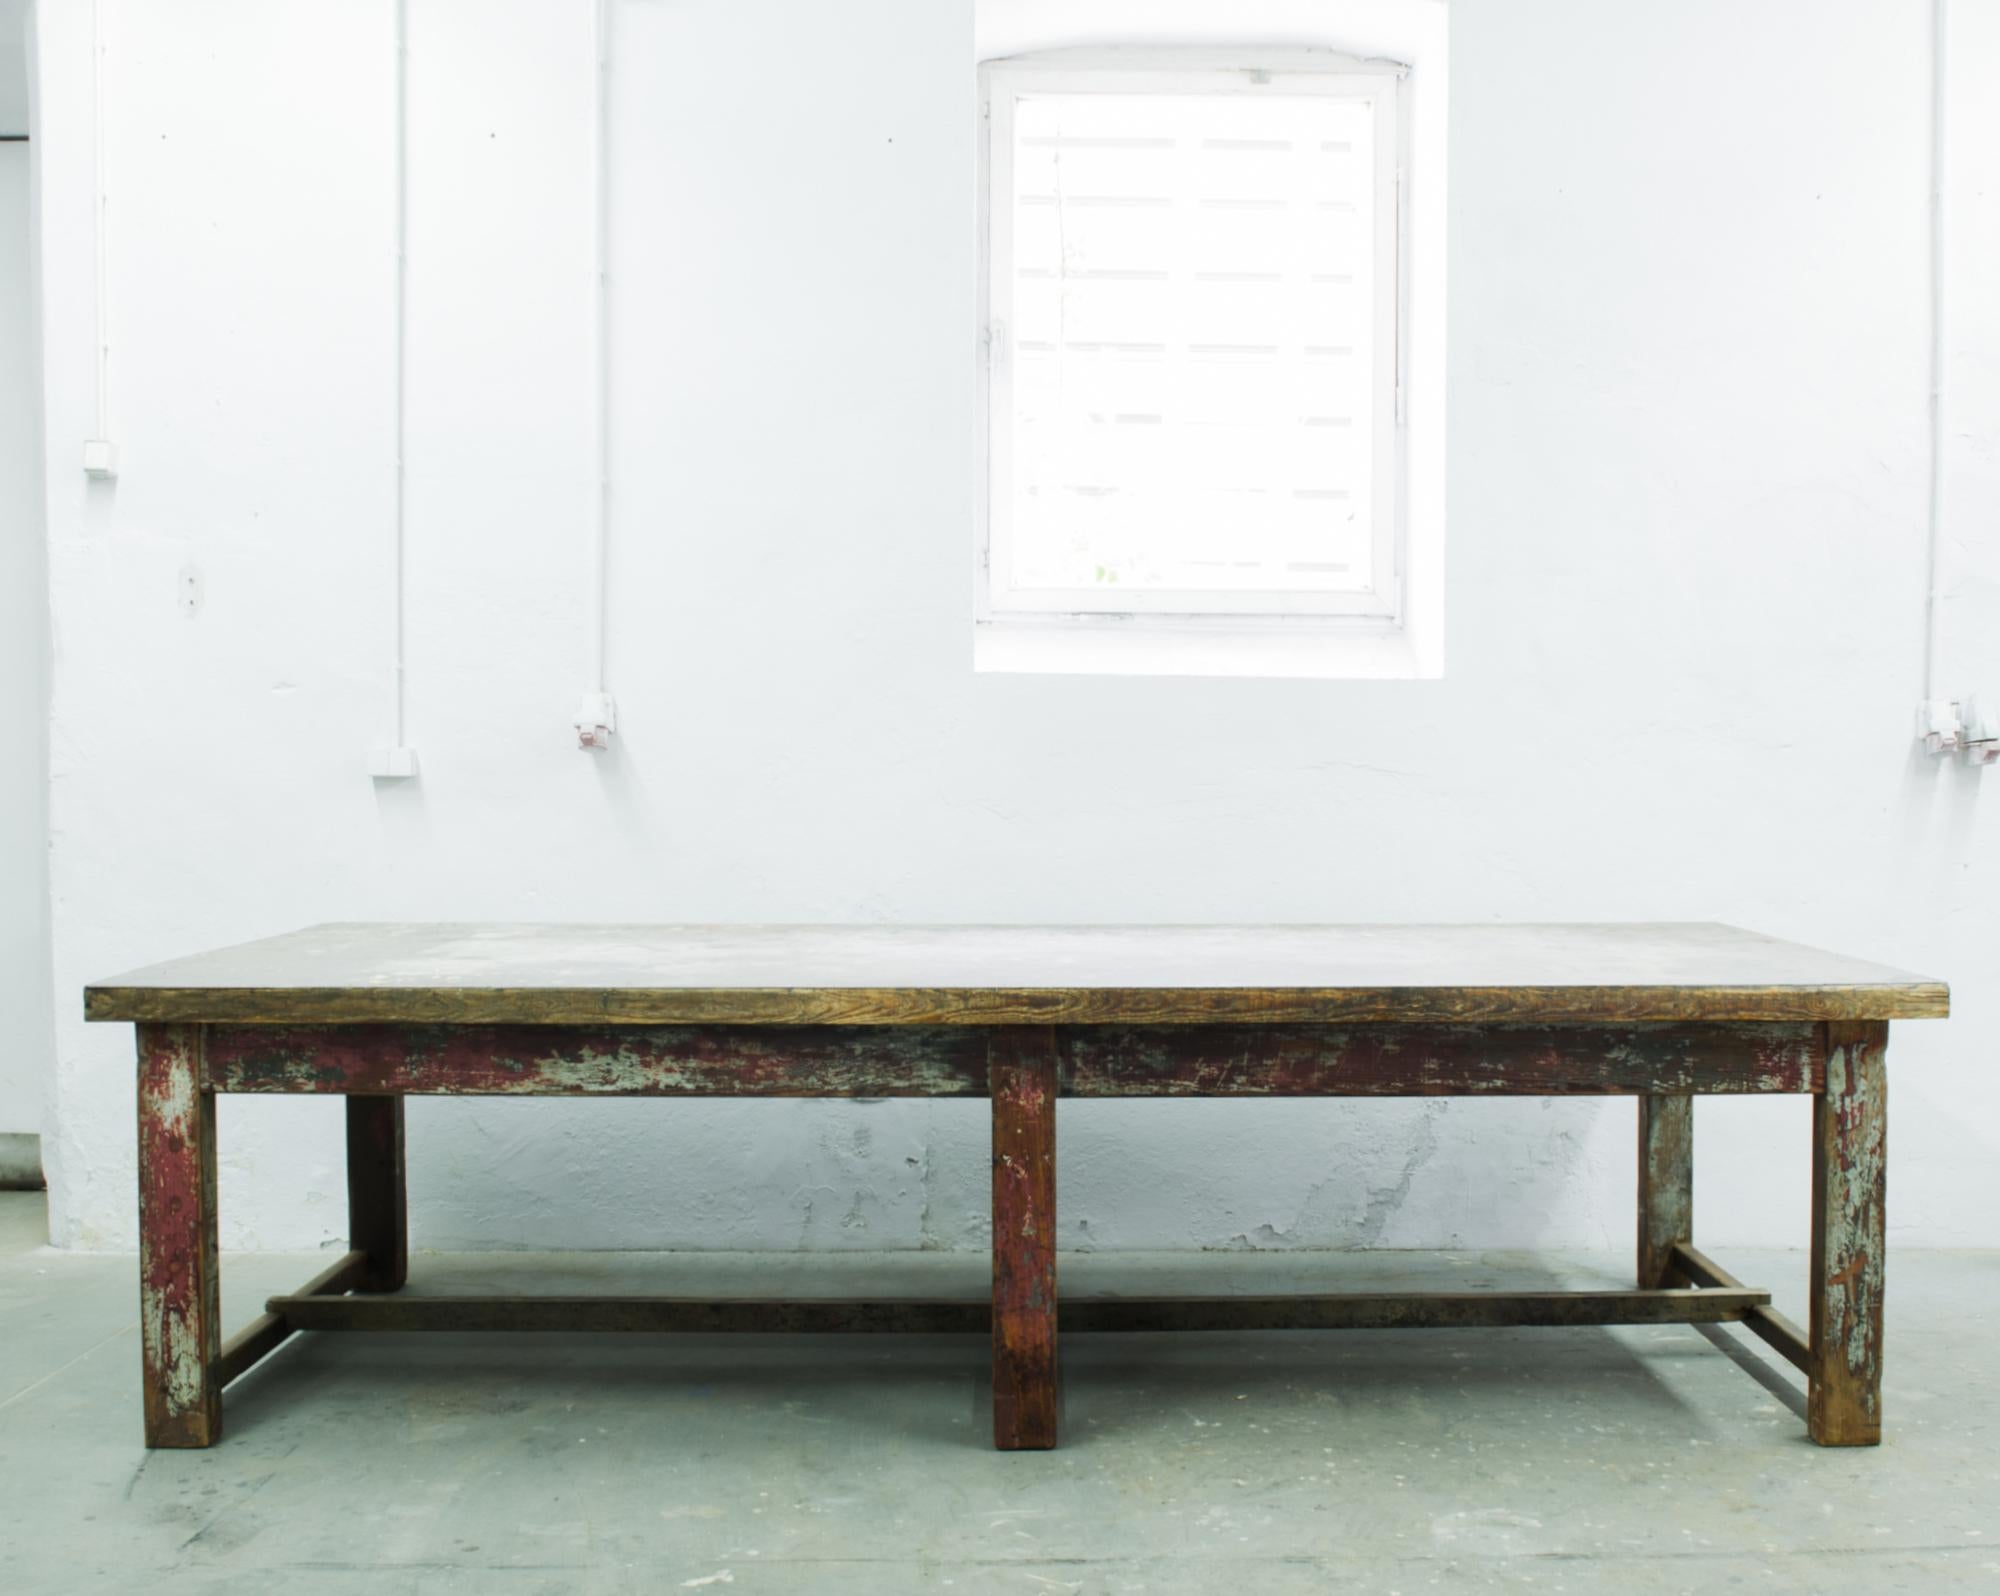 A wood patinated table from France, produced circa 1950. A long—nearly ten feet—, six legged, work table with layers of original patination. A functional piece that is beautiful for its sturdiness and durability as much as its aesthetic